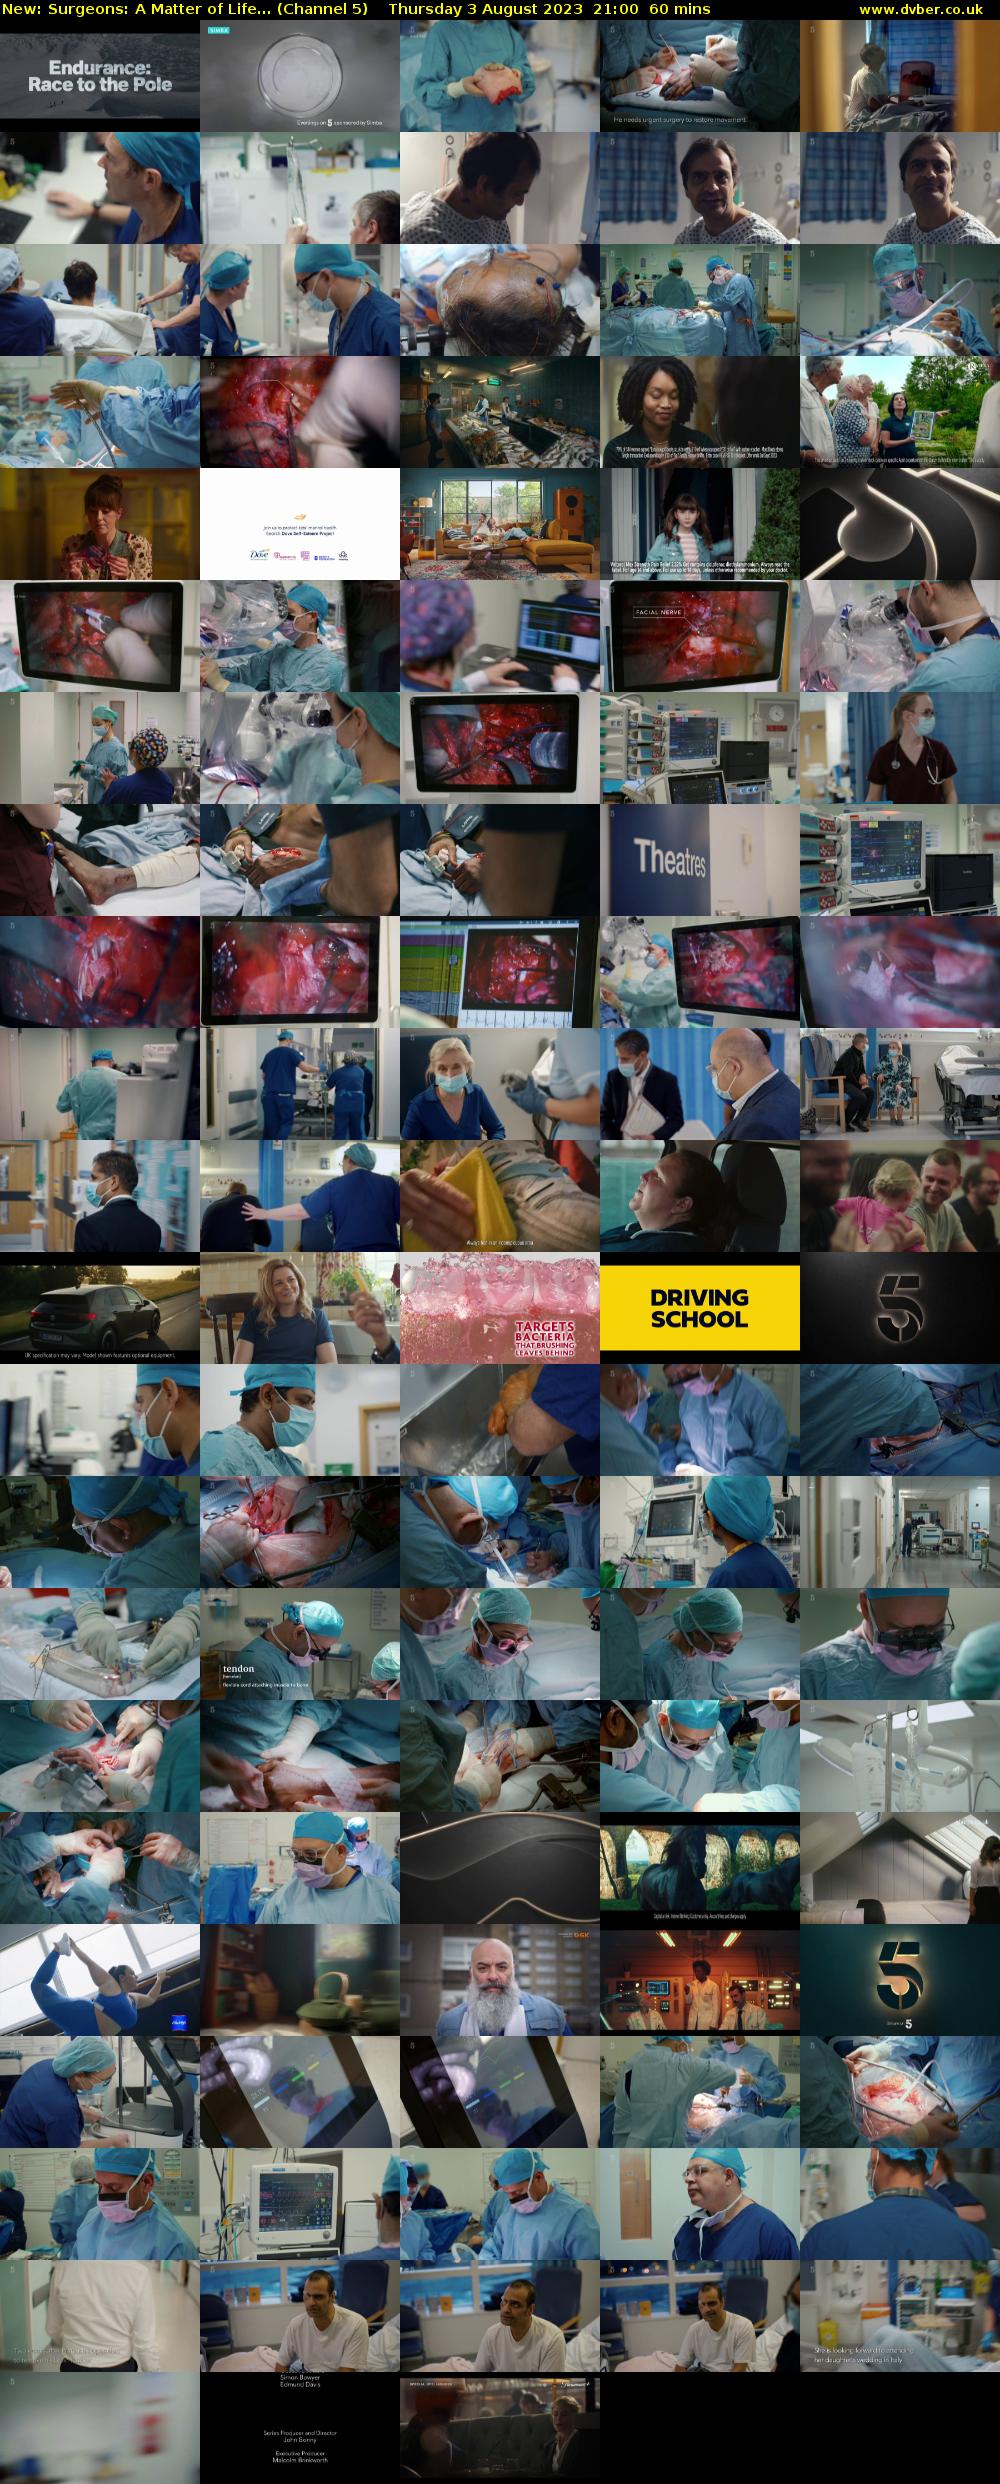 Surgeons: A Matter of Life... (Channel 5) Thursday 3 August 2023 21:00 - 22:00